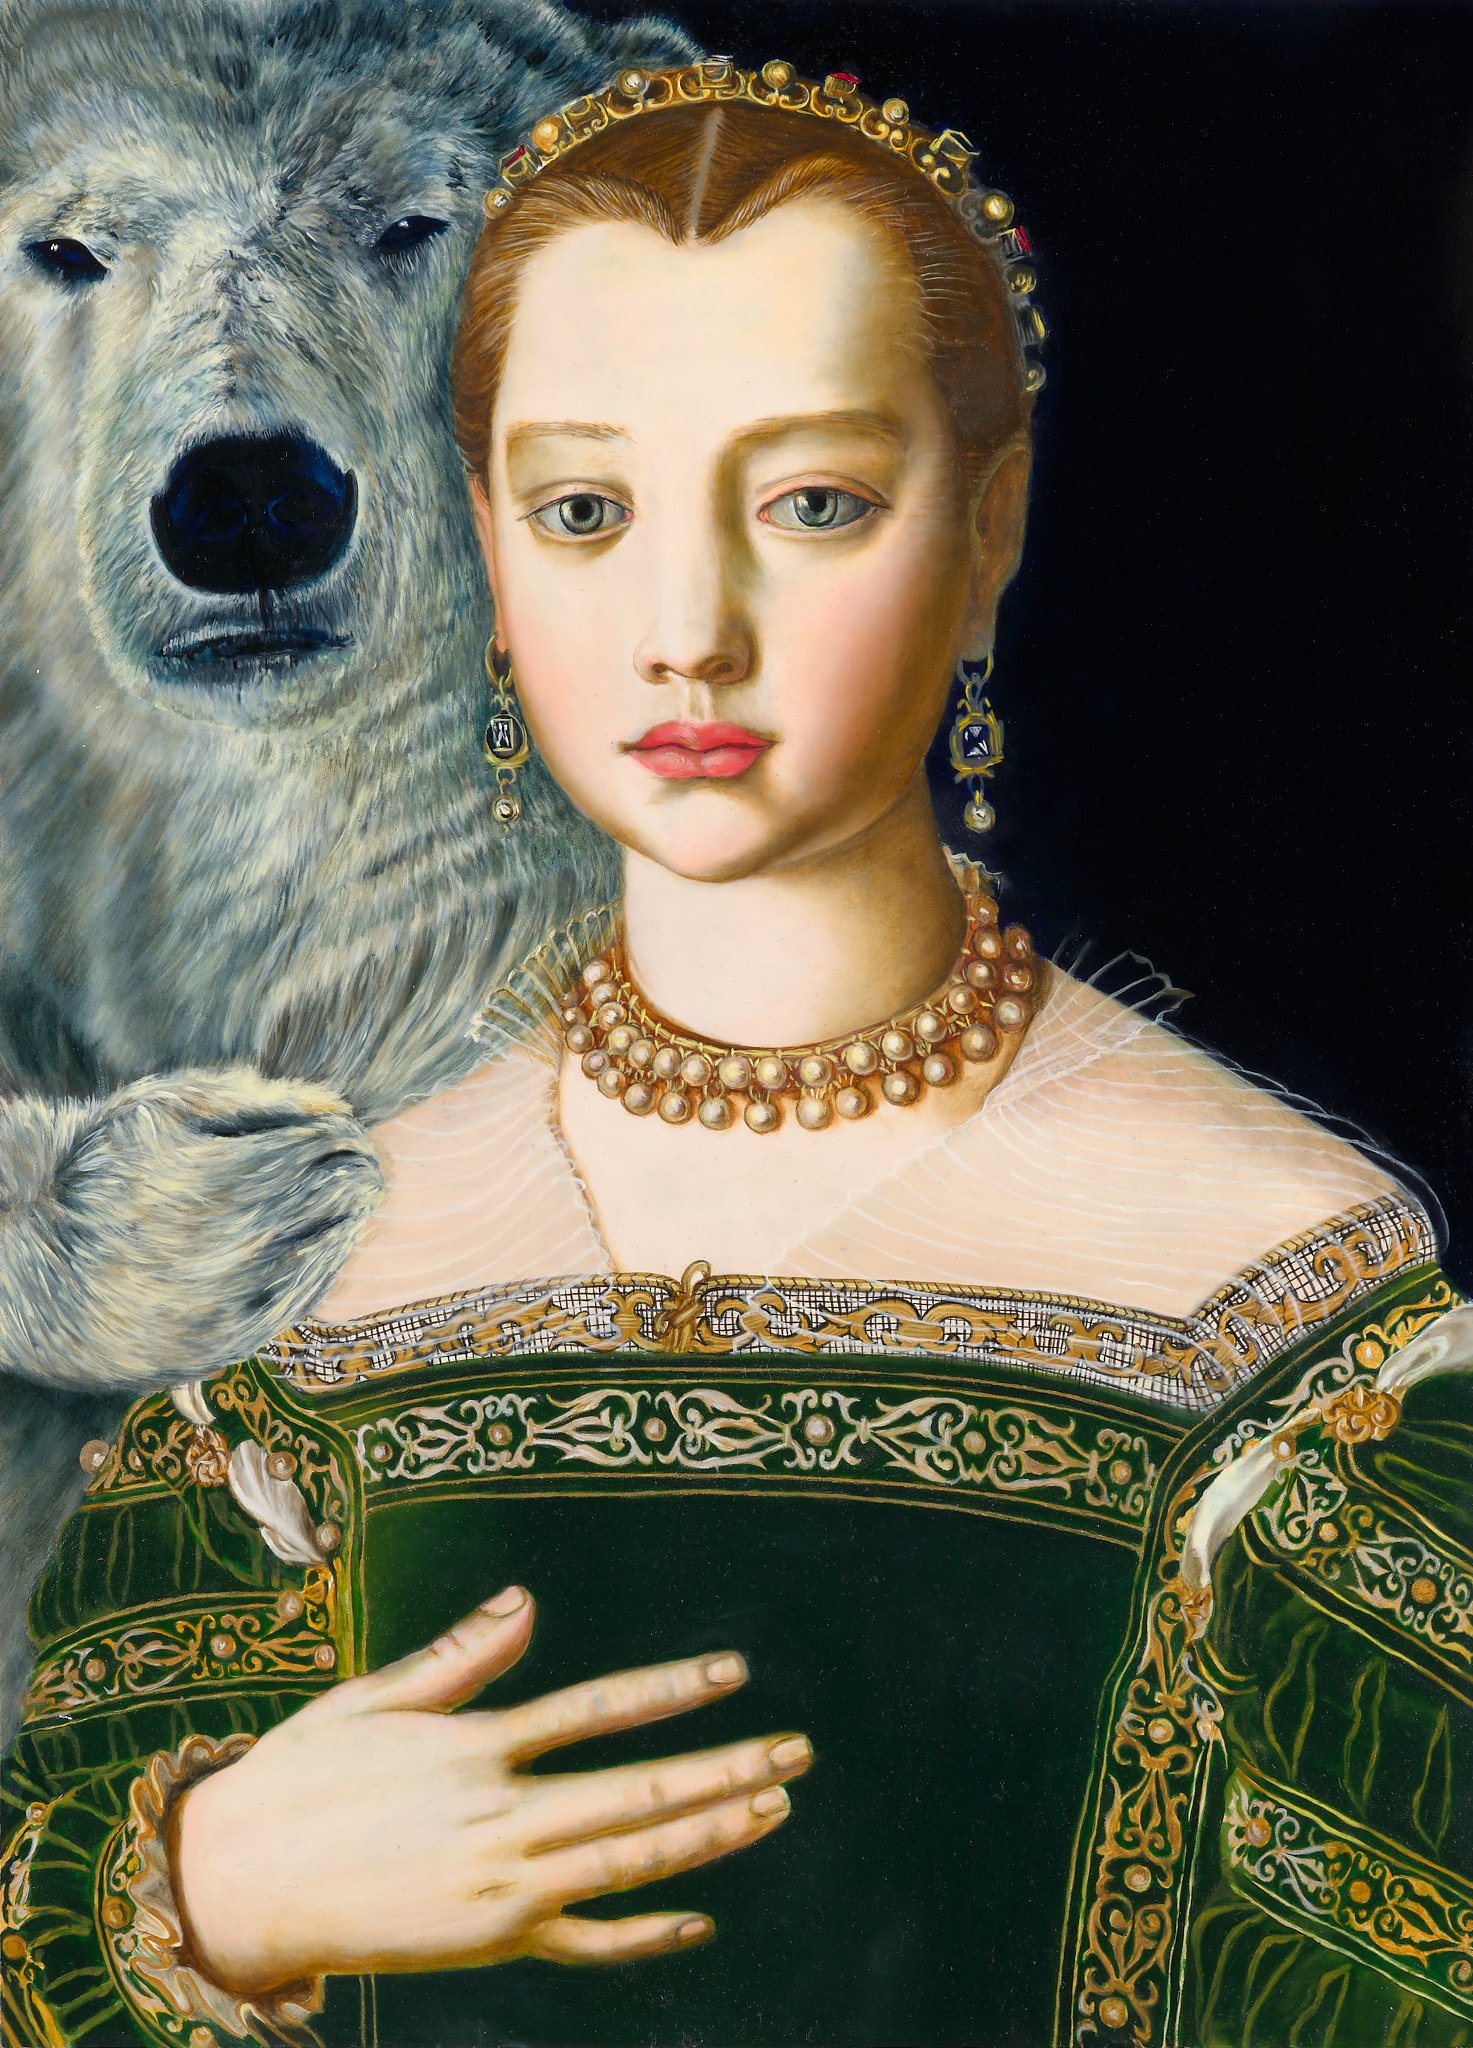   Aurora Imbued Mother Bear Shepherds Maria de Medici’s Young Transition   Oil on panel  15 x 20.5 inches  2021 